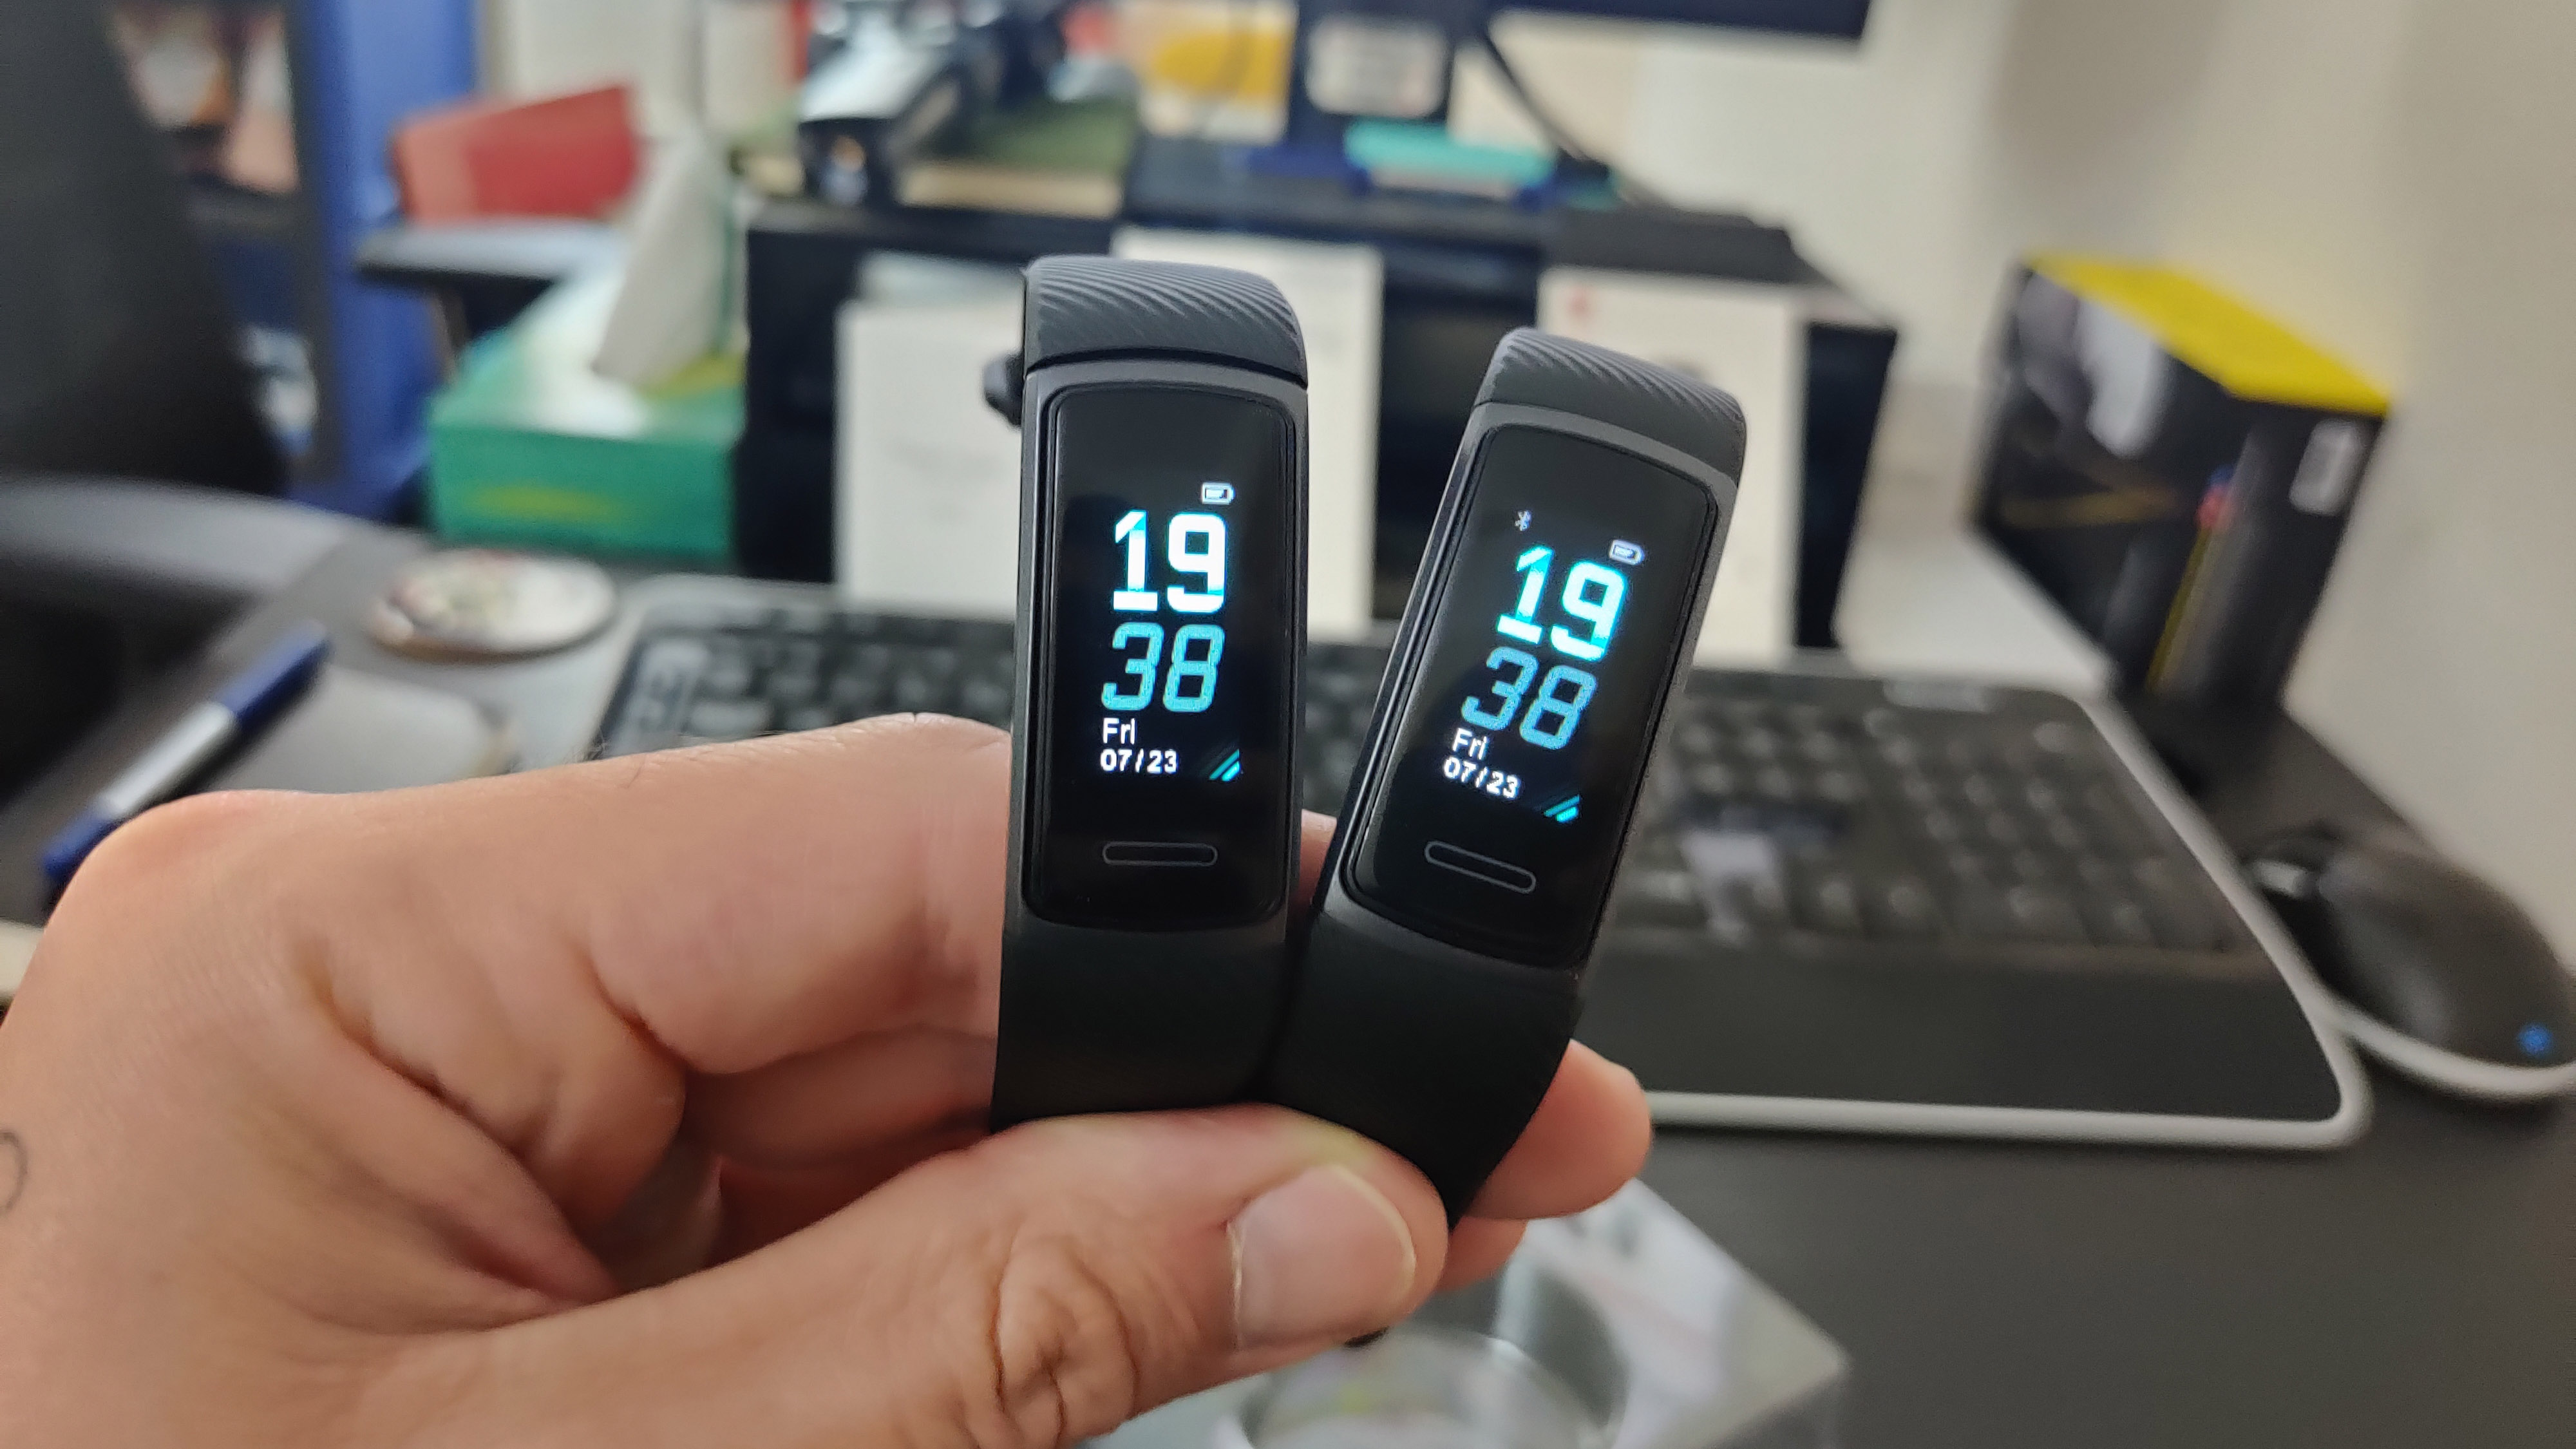 Halo View review: This $79 fitness tracker excels at the basics